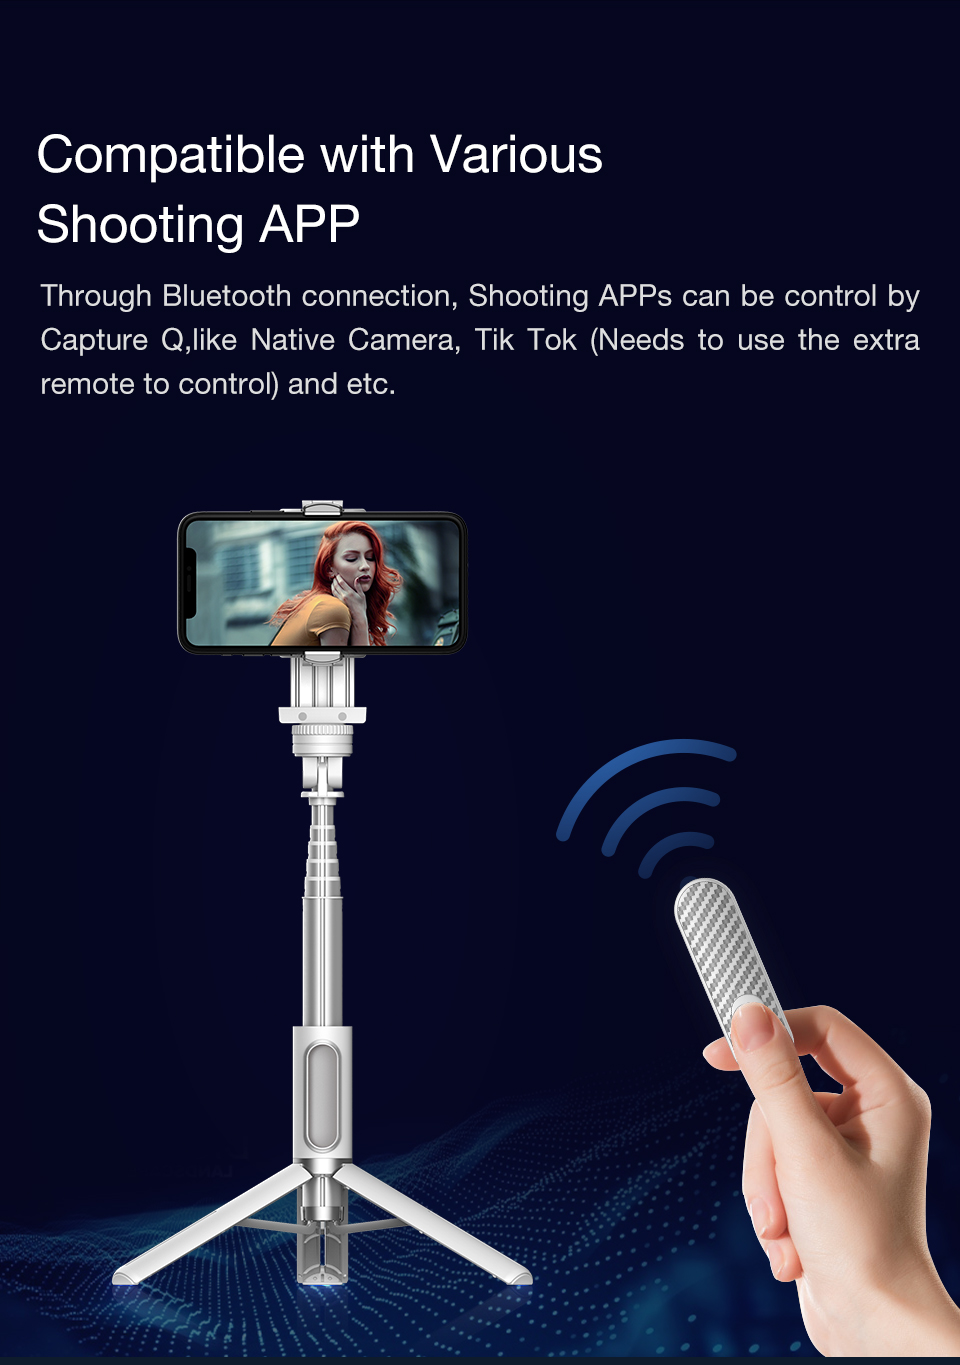 Capture-Q-Single-Axis-Handheld-Gimbal-Smartphone-Stabilizer-Extendable-Selfie-Stick-with-Tripod-for--1701149-2